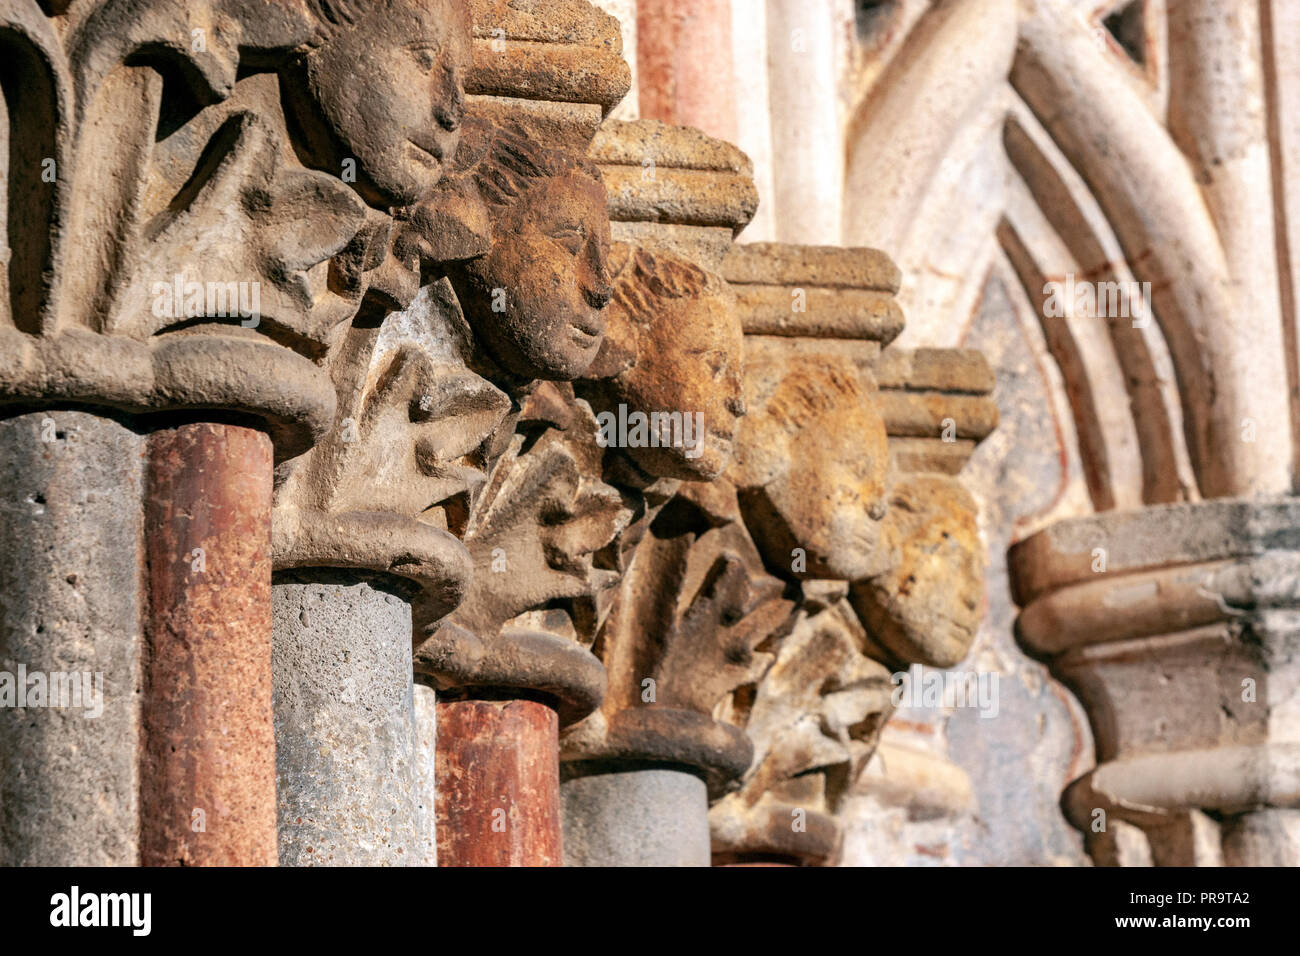 Stone capital heads in the  Royal Monastery of Guadalupe, , Guadalupe, Caceres province, Extremadura, Spain Stock Photo